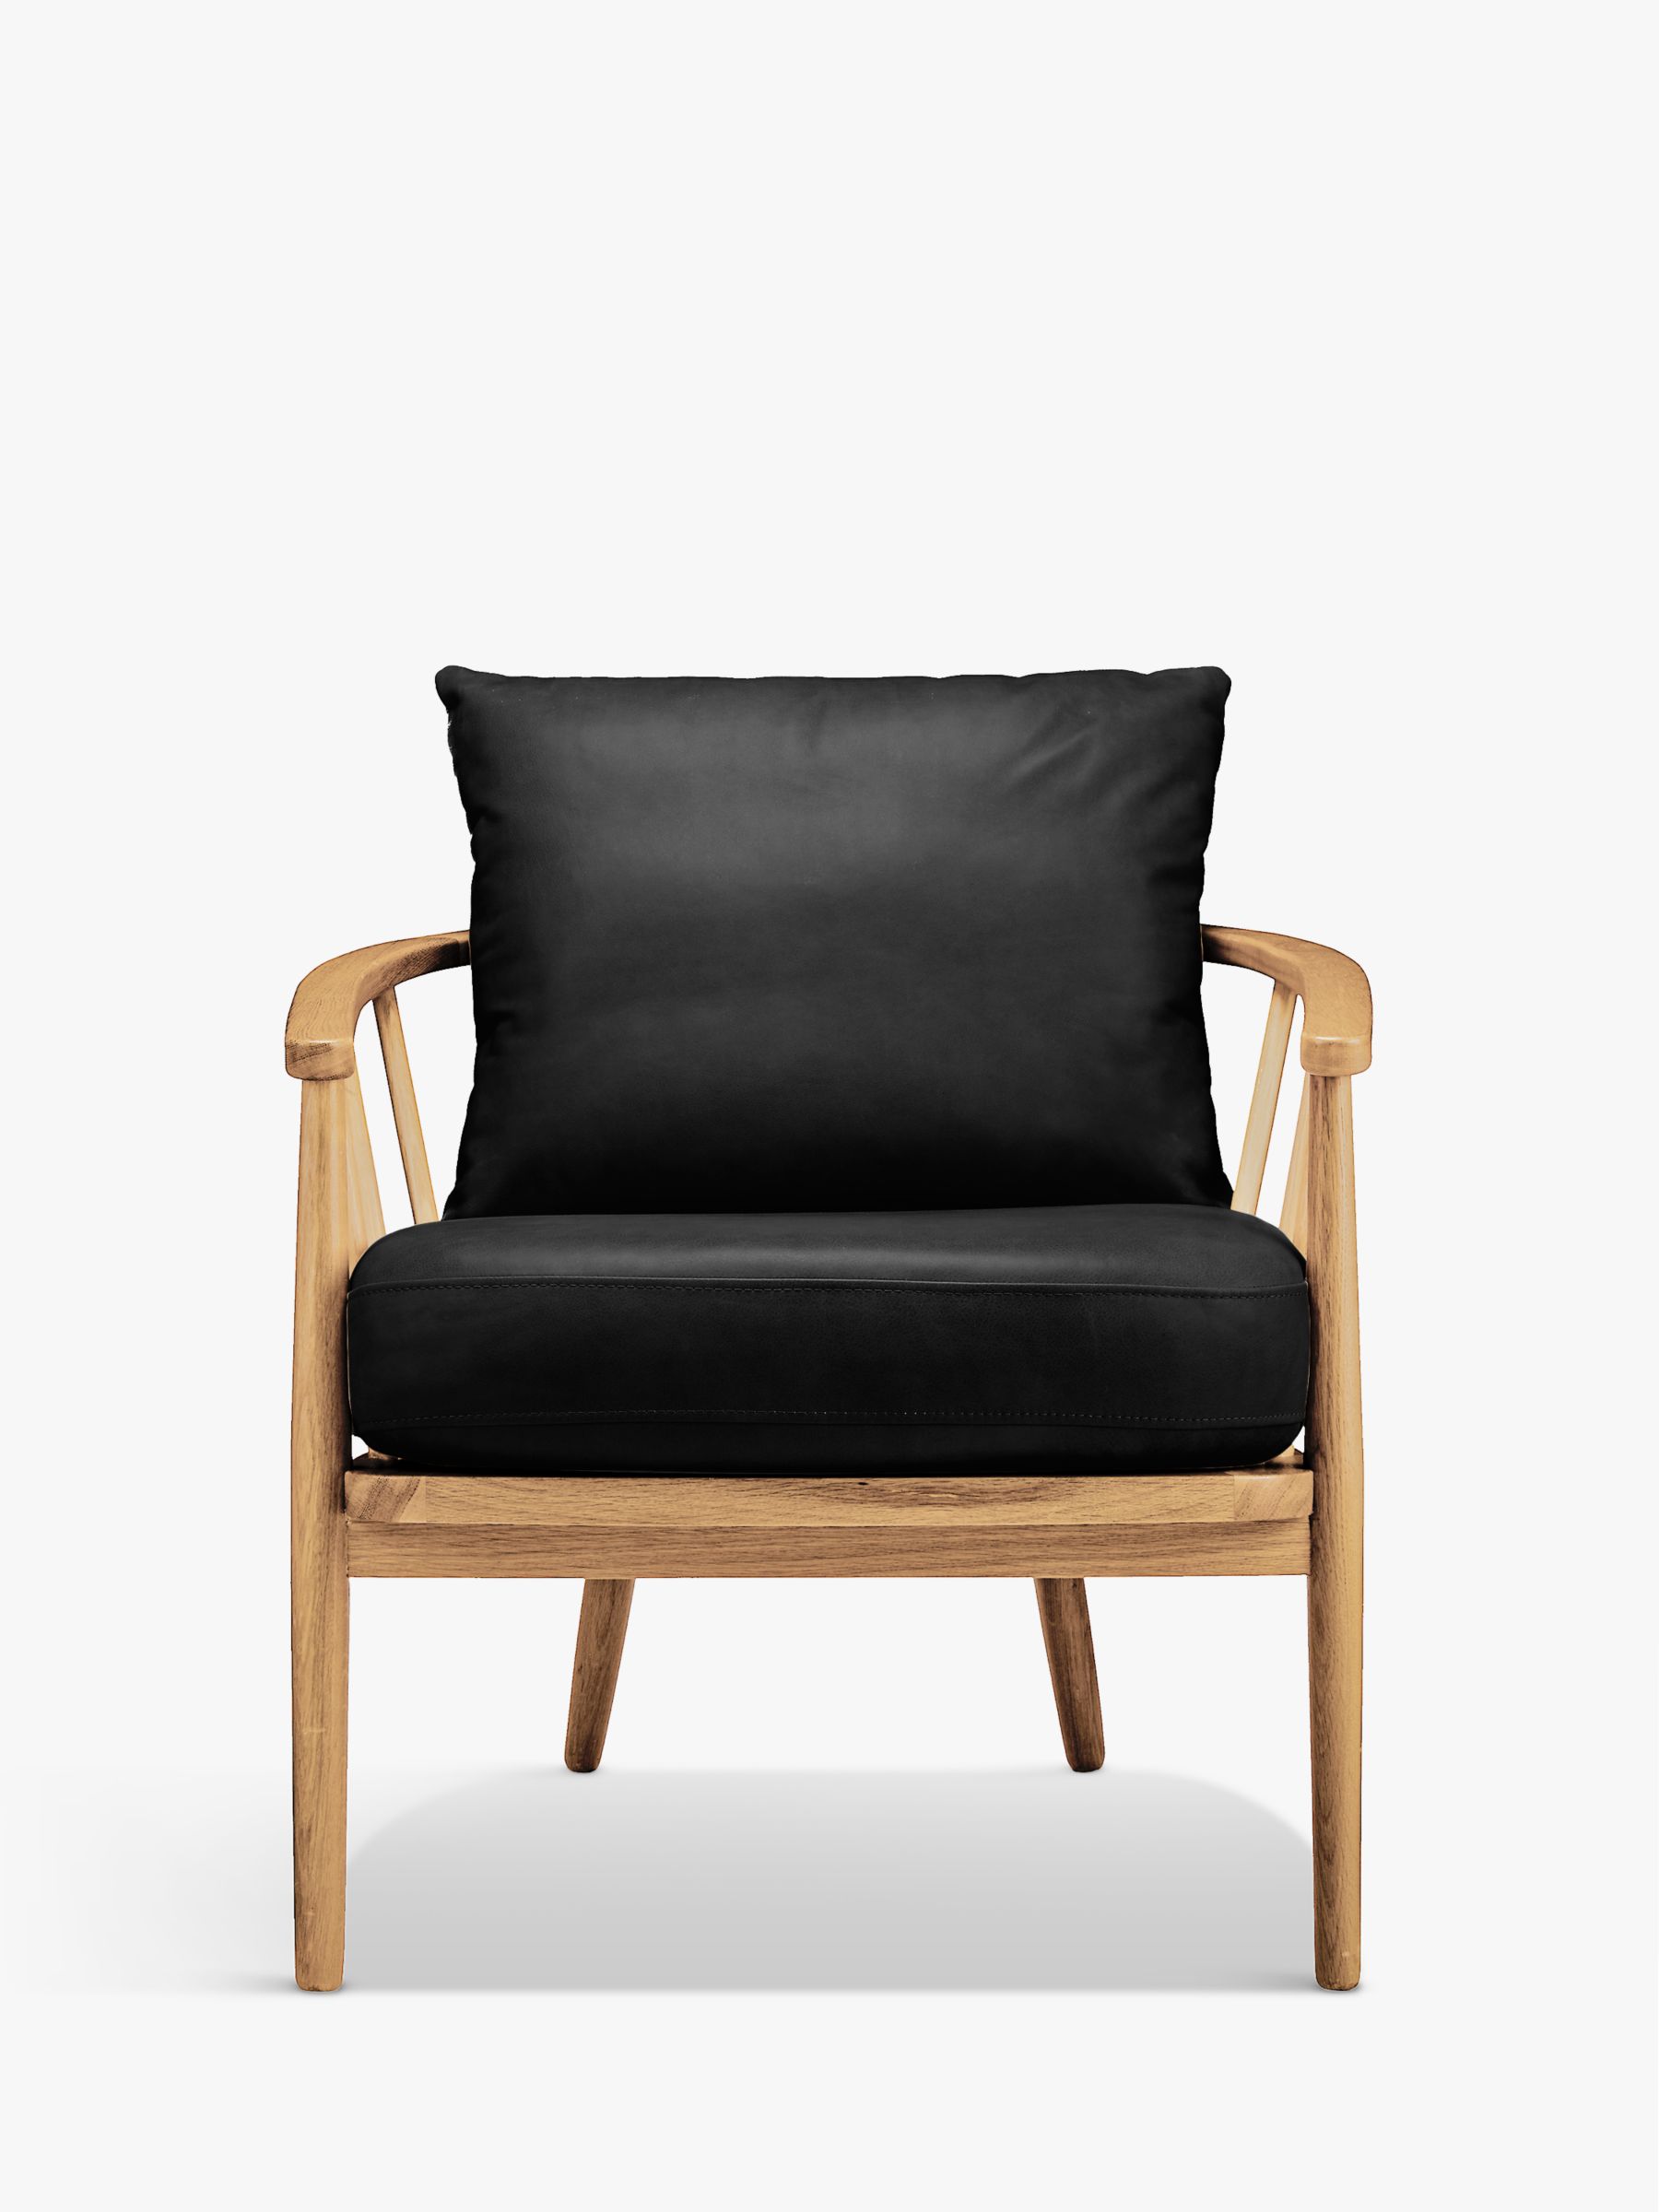 Frome Range, John Lewis Frome Leather Armchair, Light Wood Frame, Contempo Black